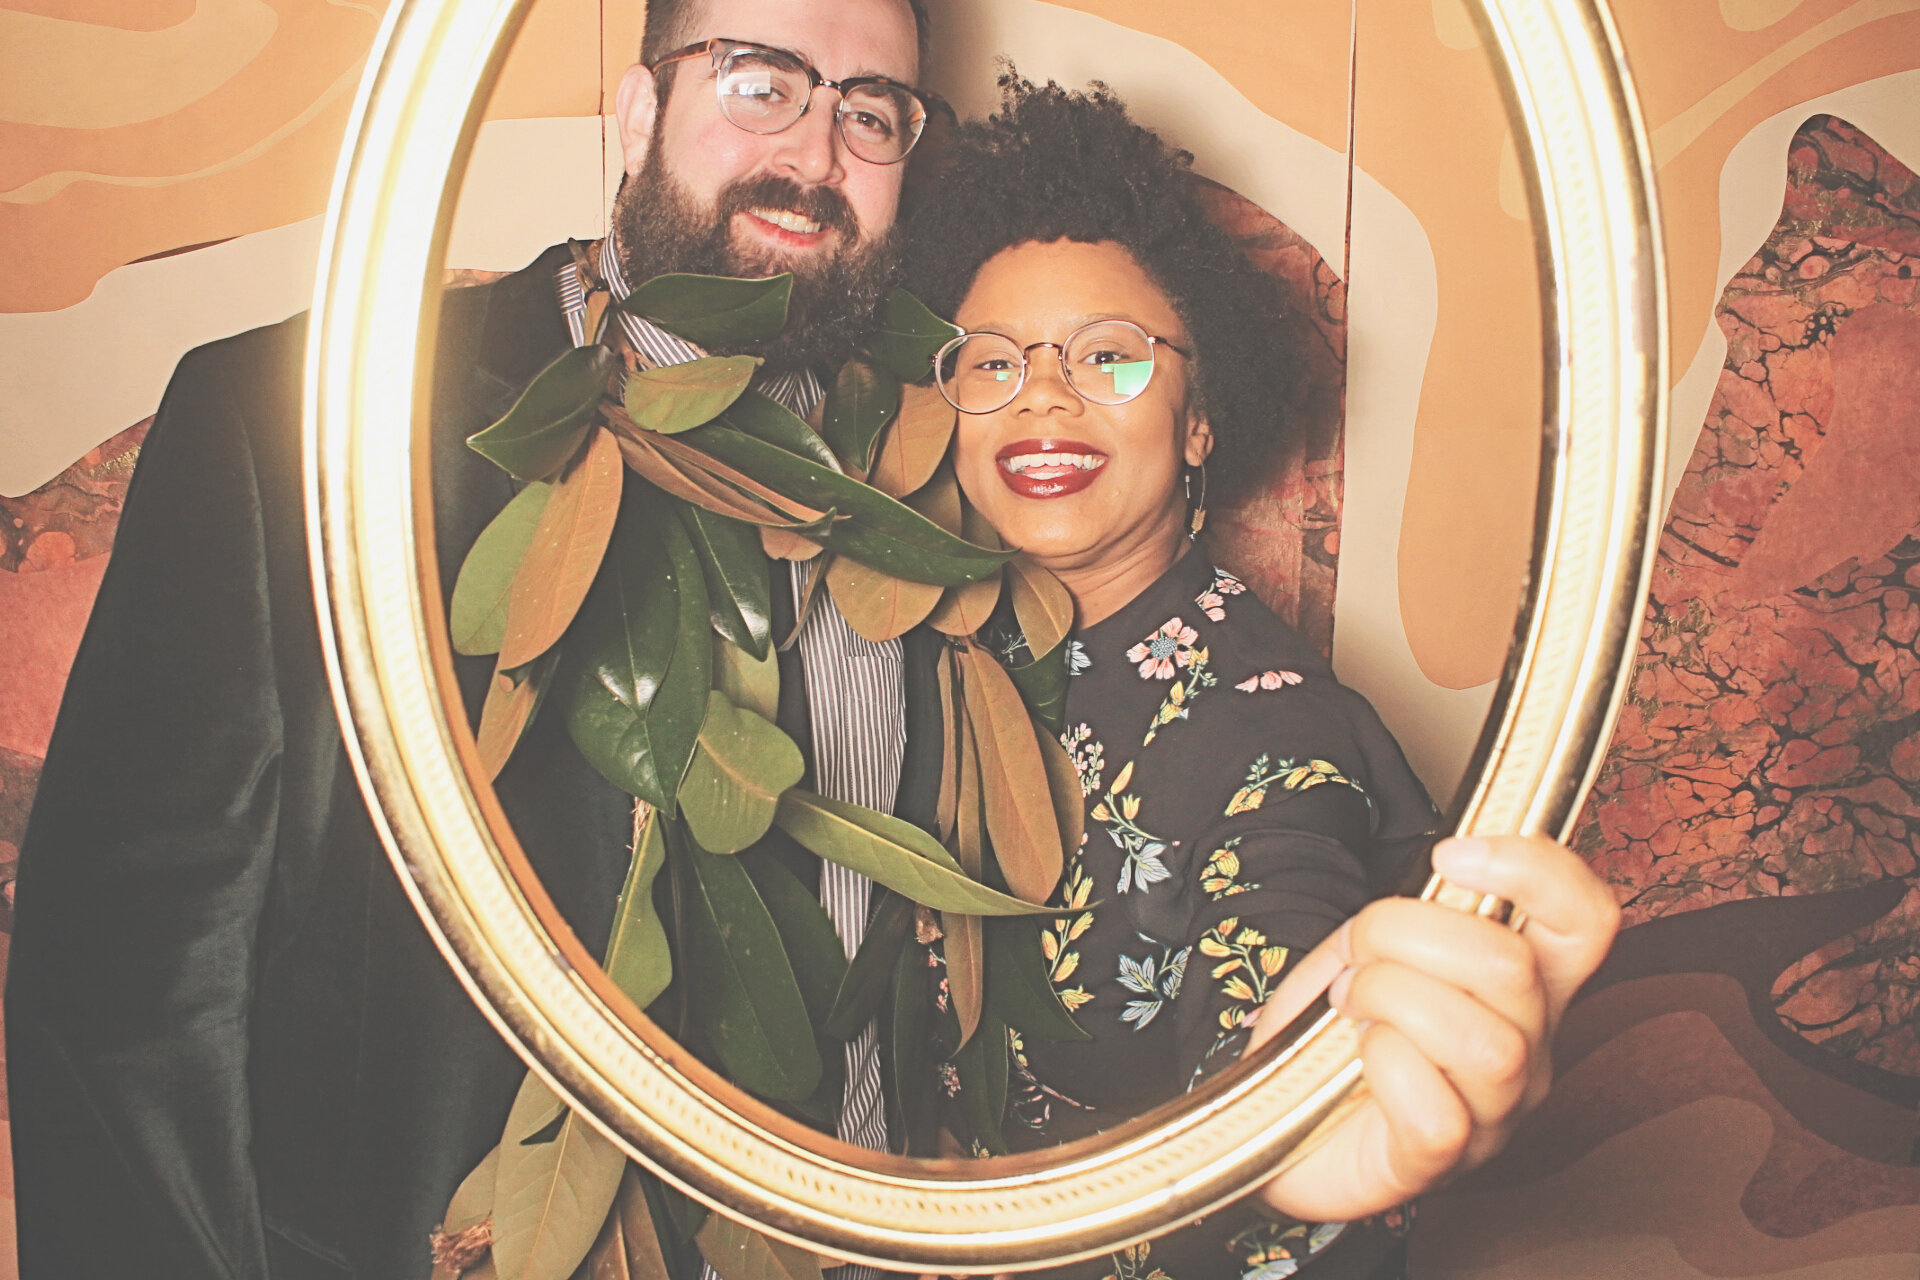 11-2-18 JD Atlanta Summerour Studios Photo Booth - Red Clay Soiree - Robot Booth405.jpg